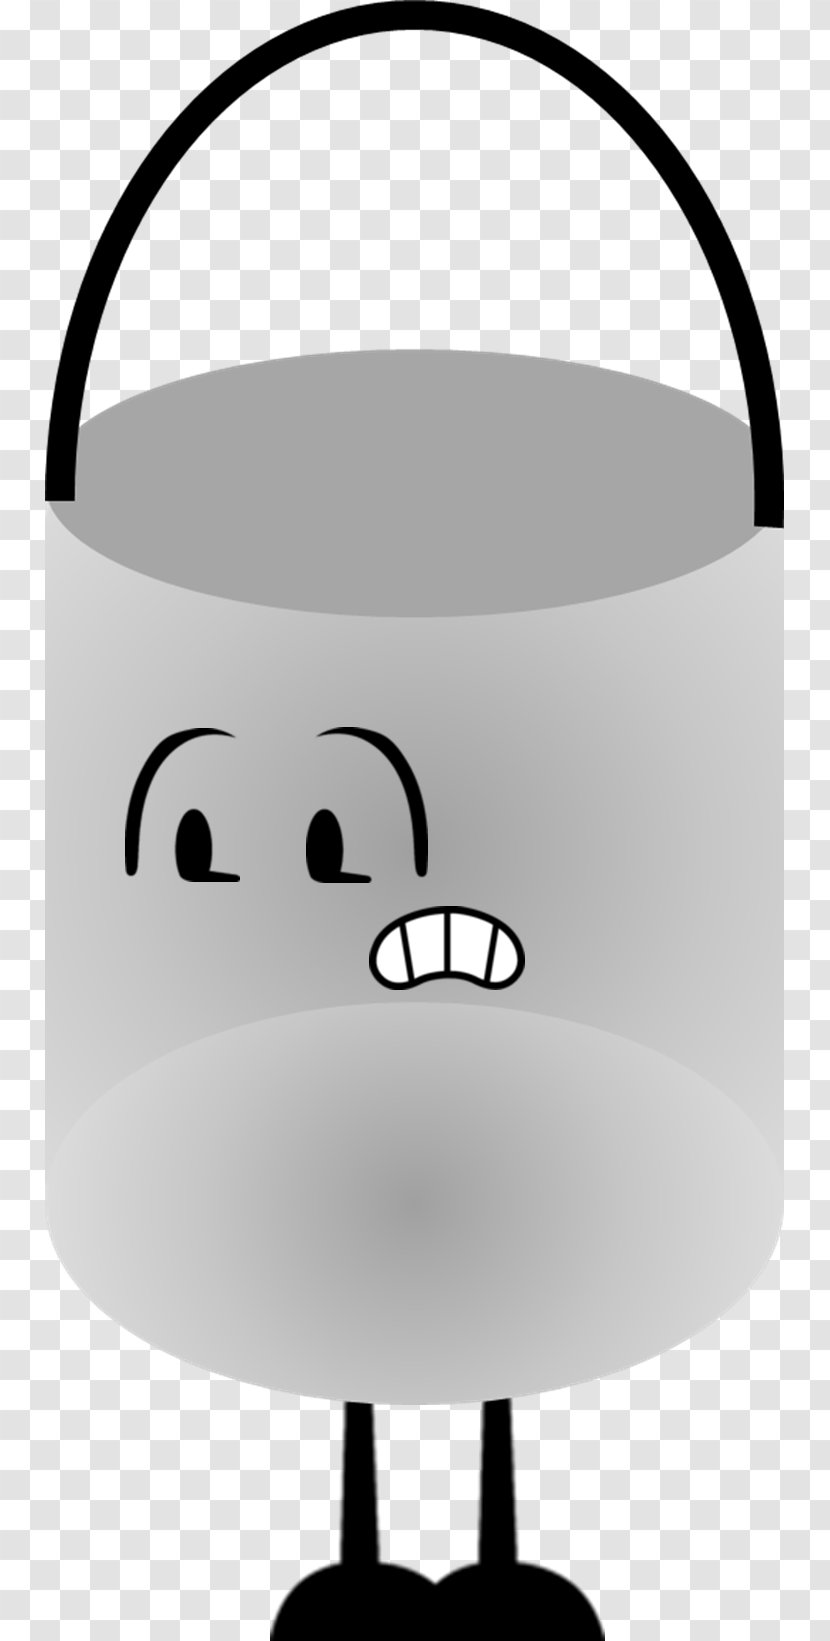 Bucket Monochrome Photography Clip Art - White - Ucket Transparent PNG